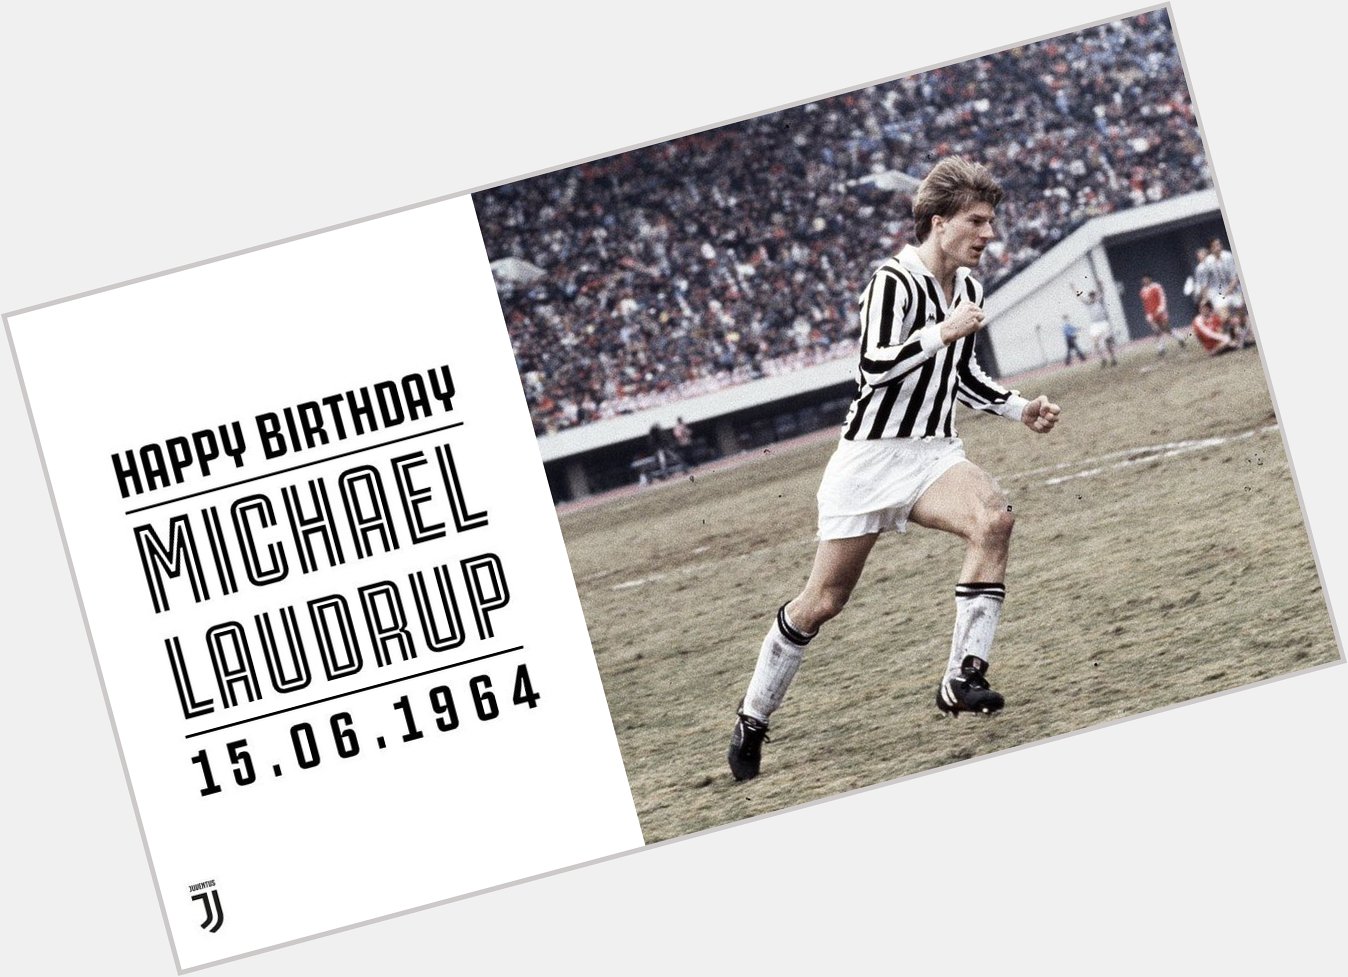 A big Happy 54th Birthday today to Michael Laudrup!    